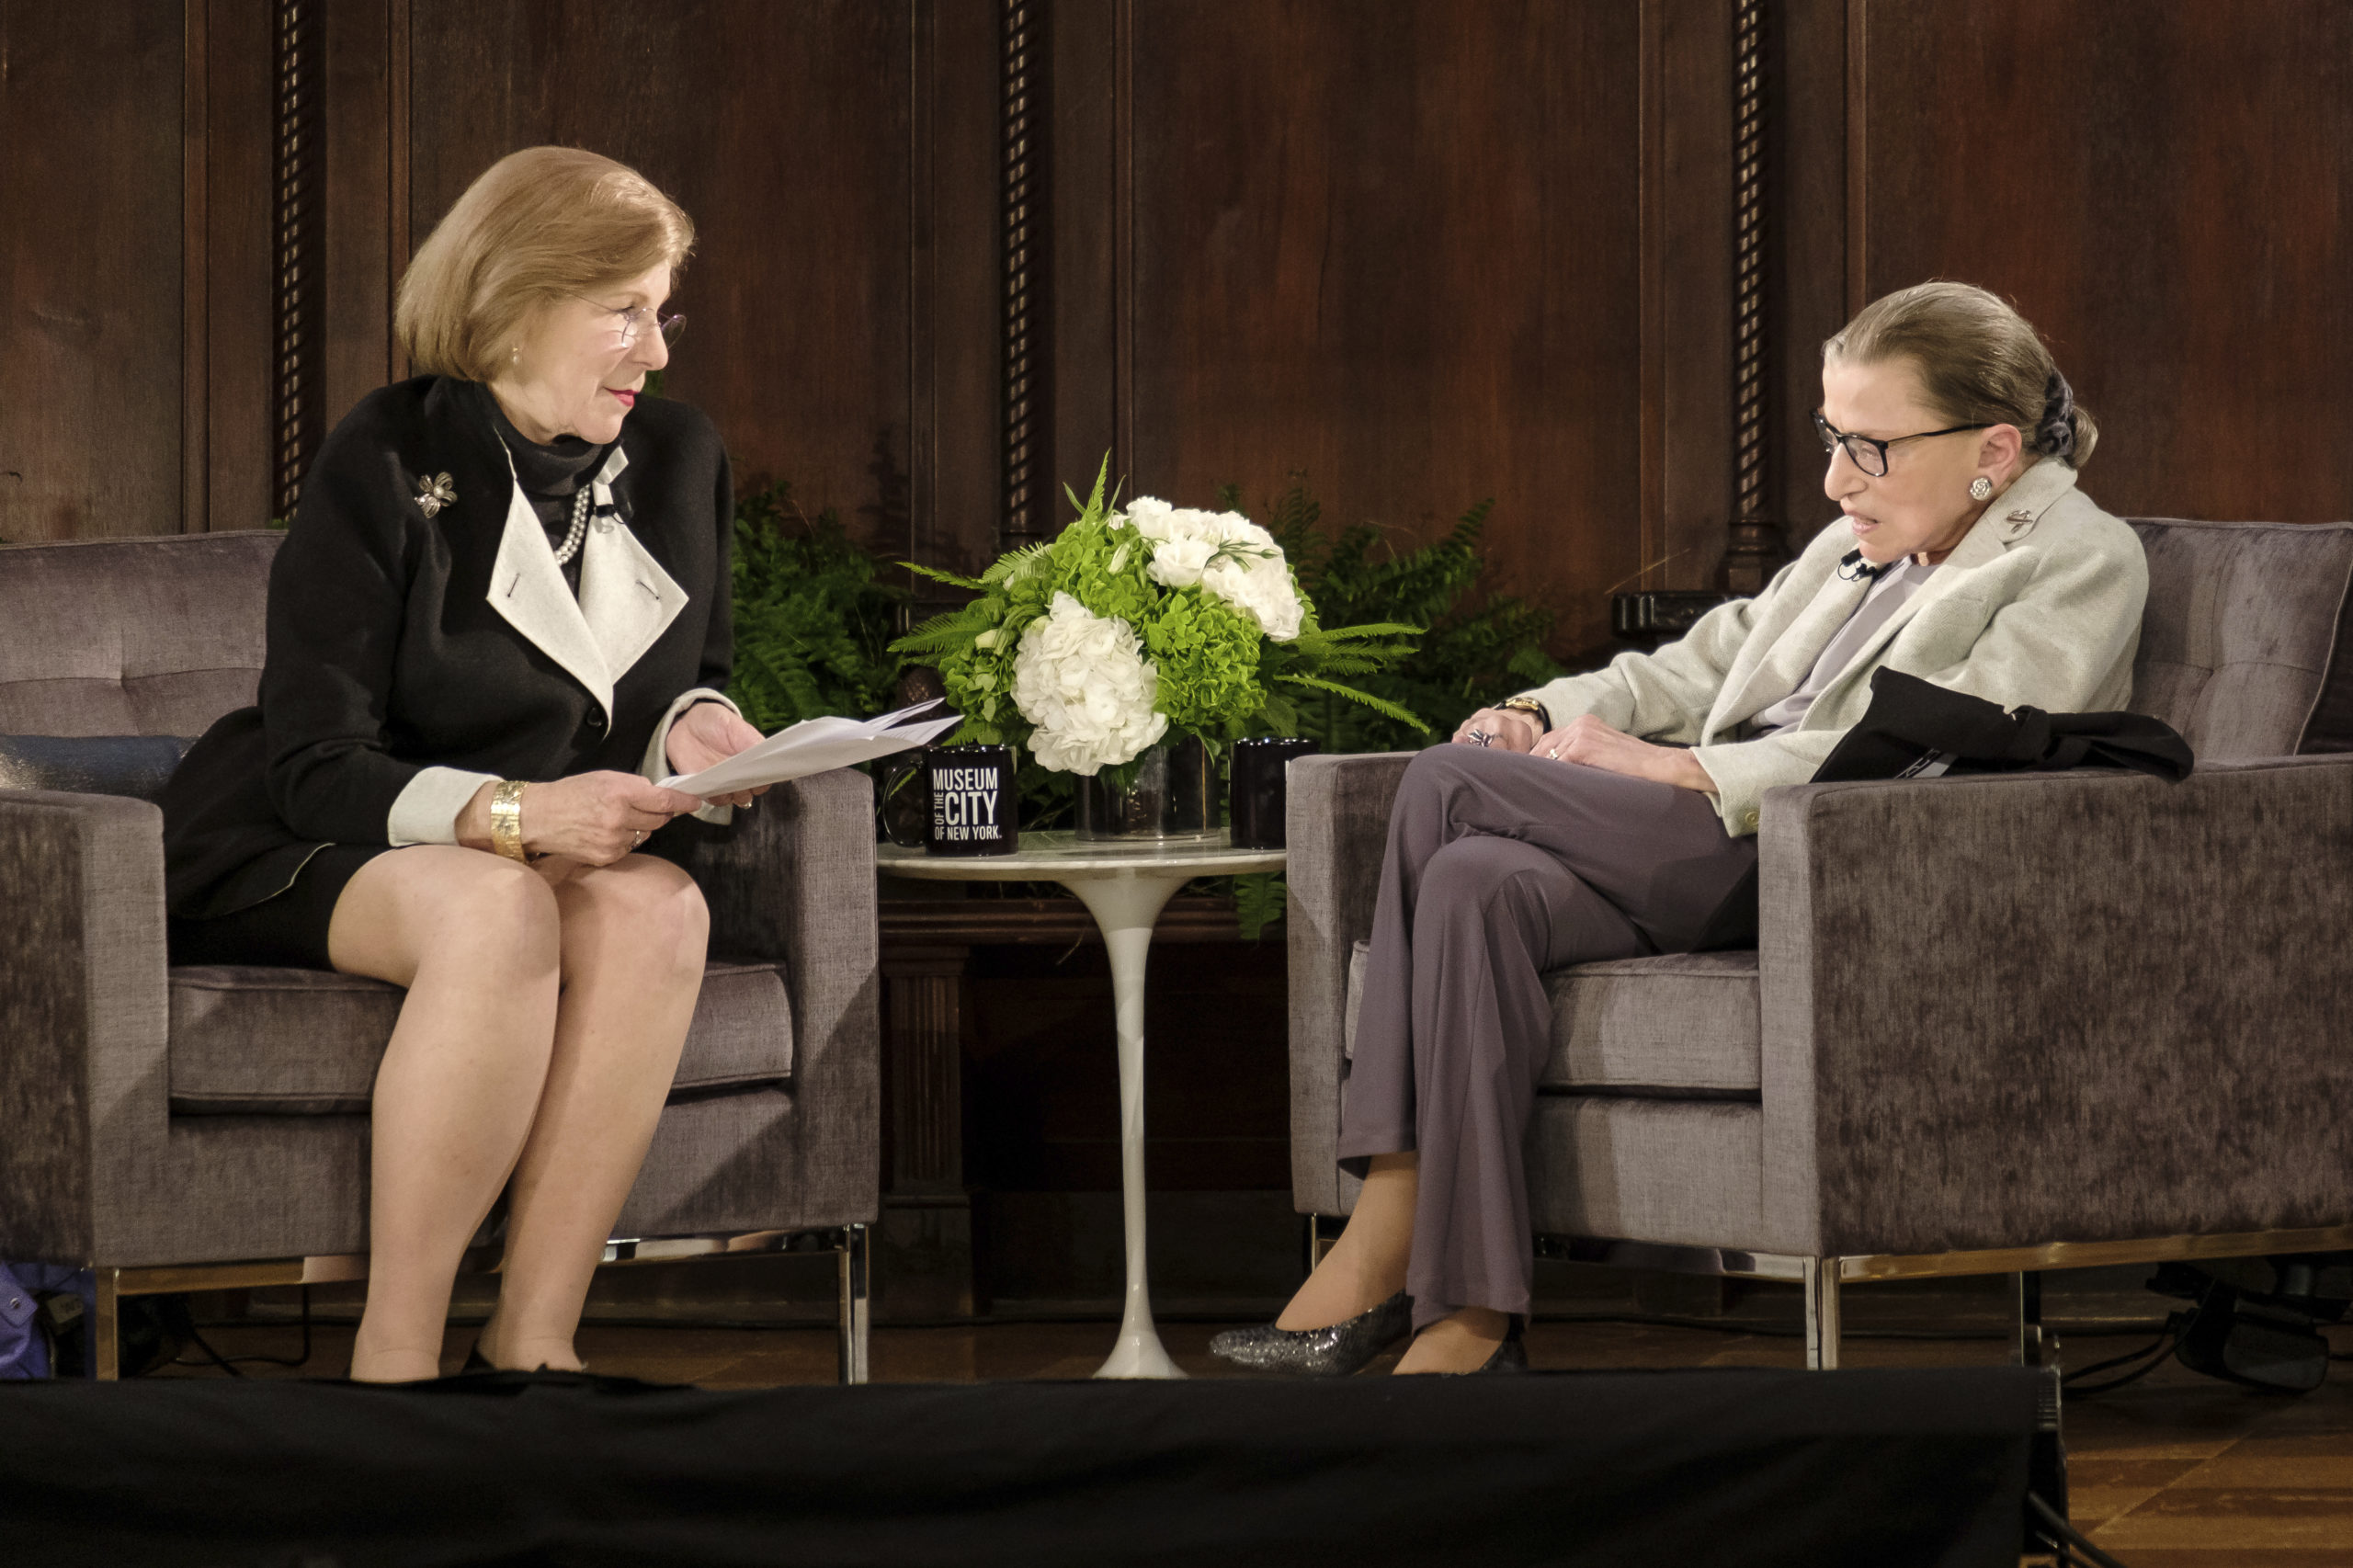 Against a brown curtain, Nina Totenberg, who wears a black dress and holds a stack of papers, interviews Ruth Bader Ginsberg on stage